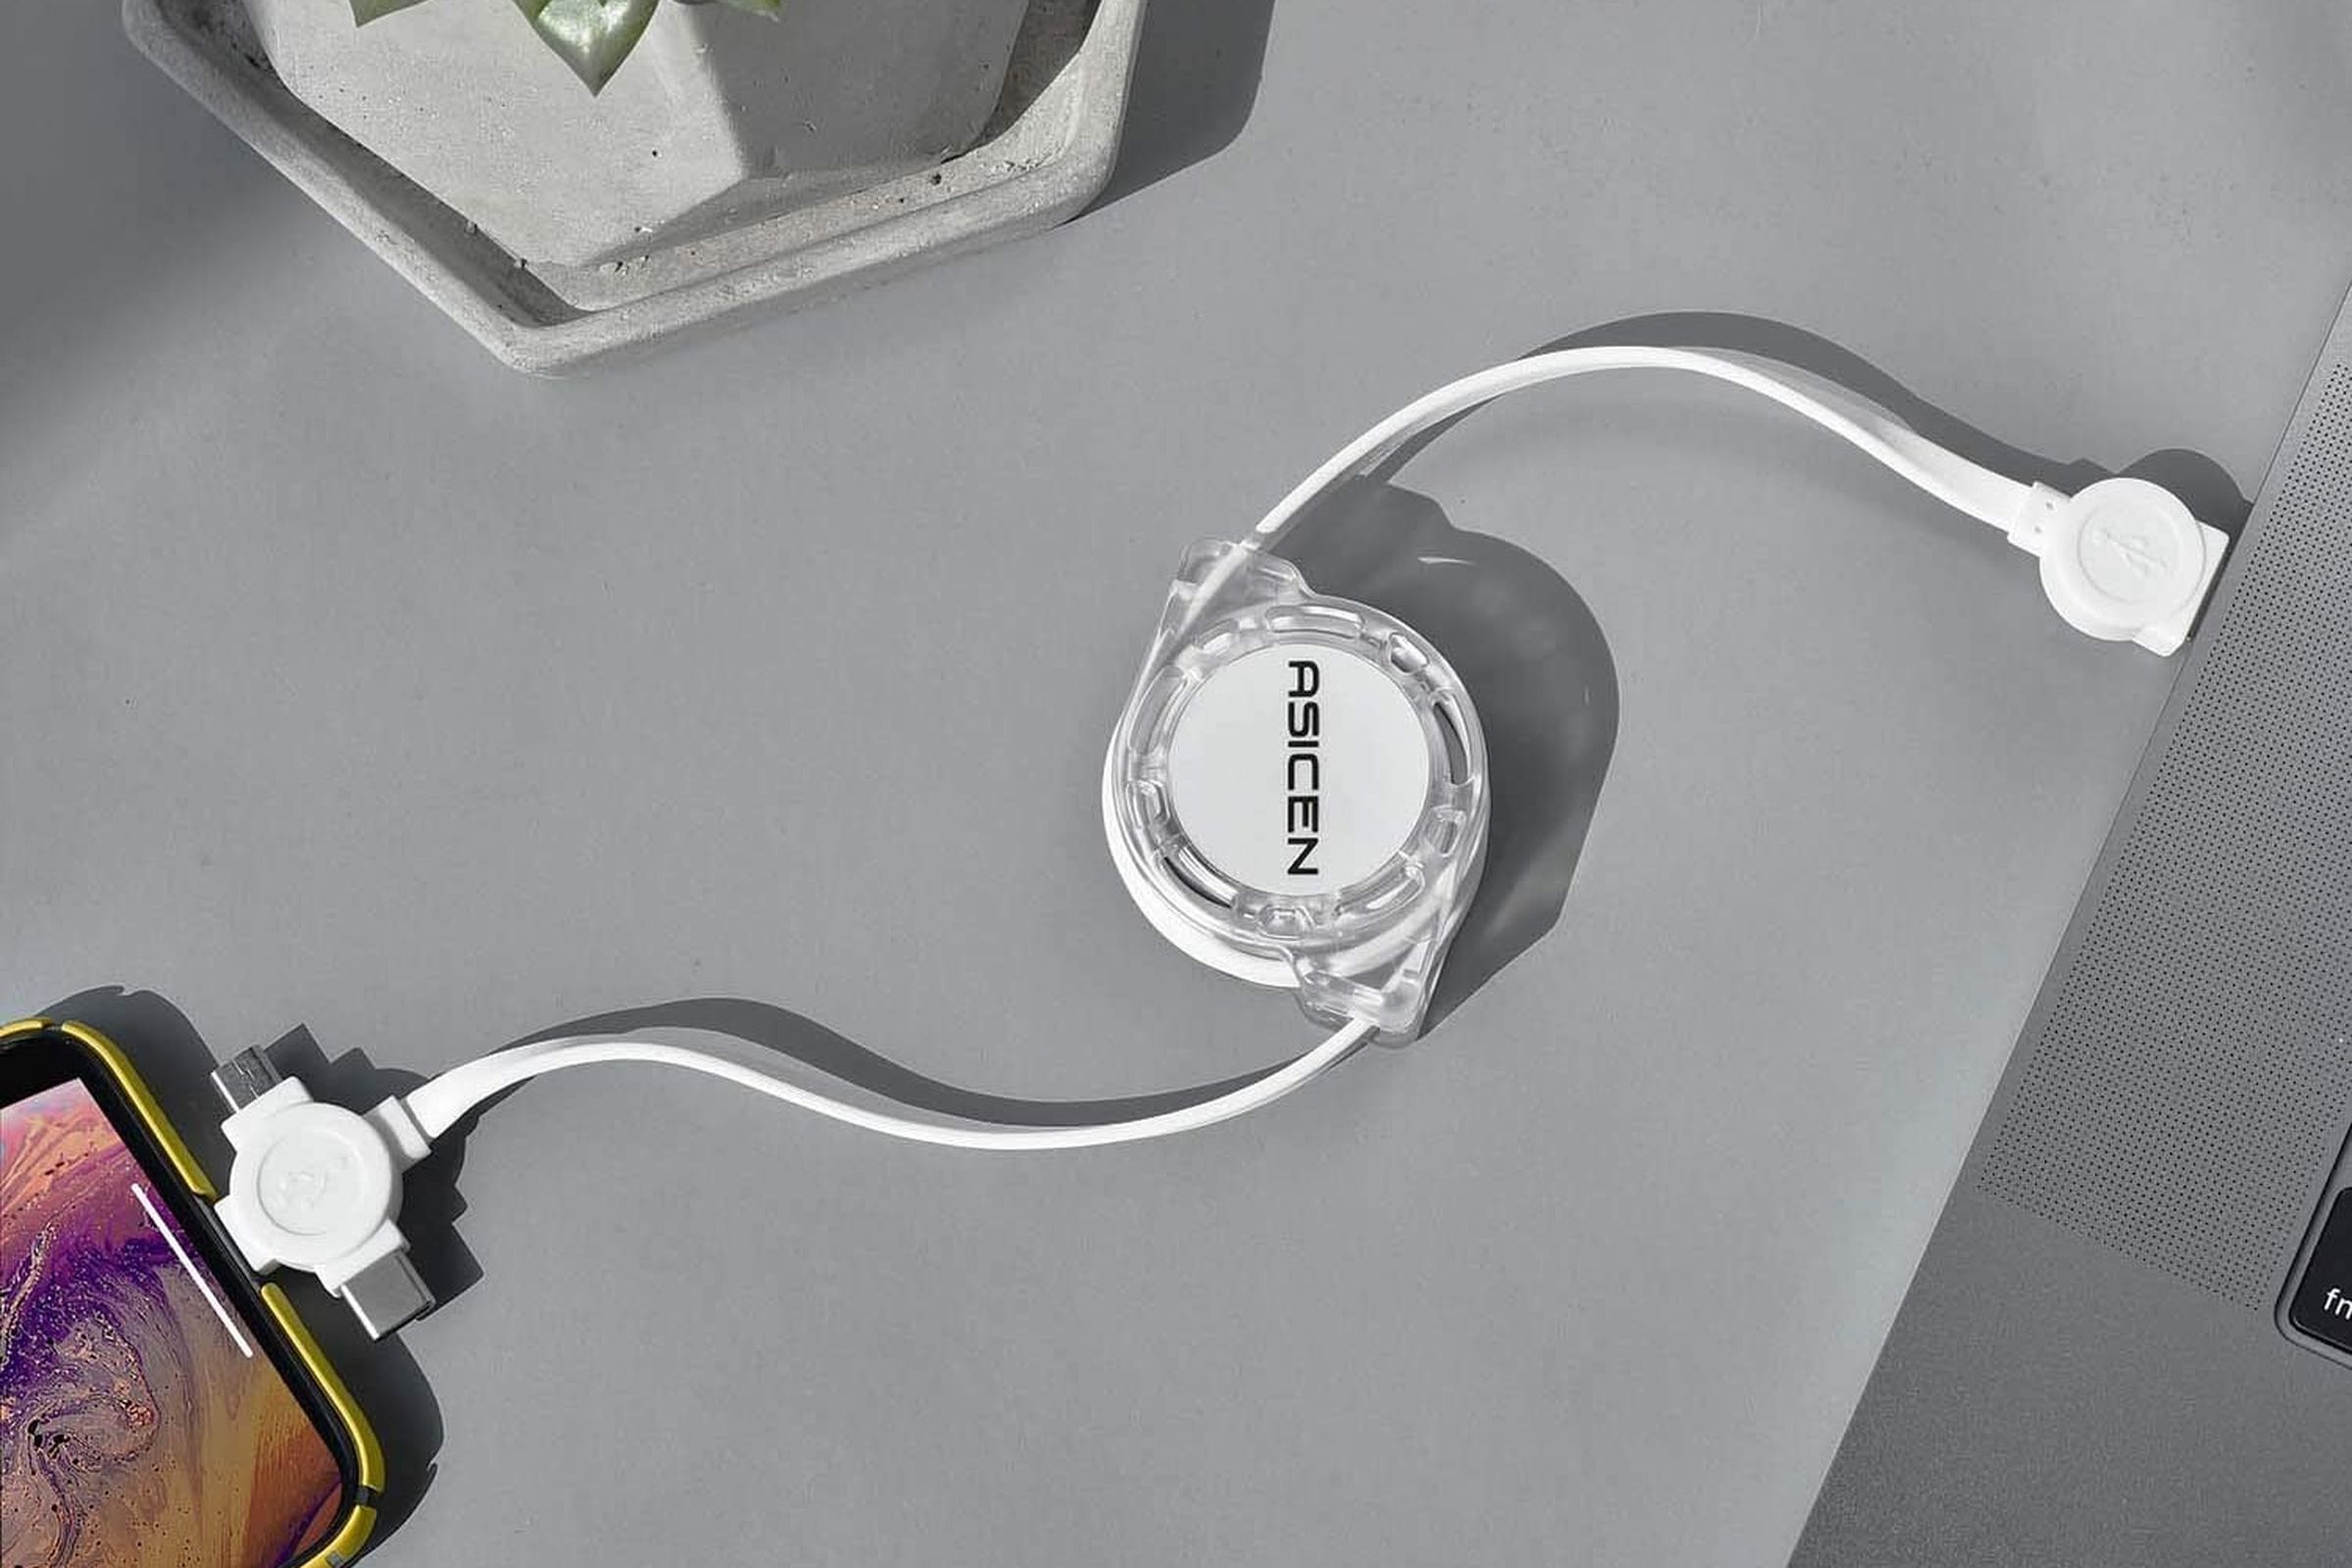 The Asicen retractable 3-in-1 charging cable plugged into a phone and laptop.